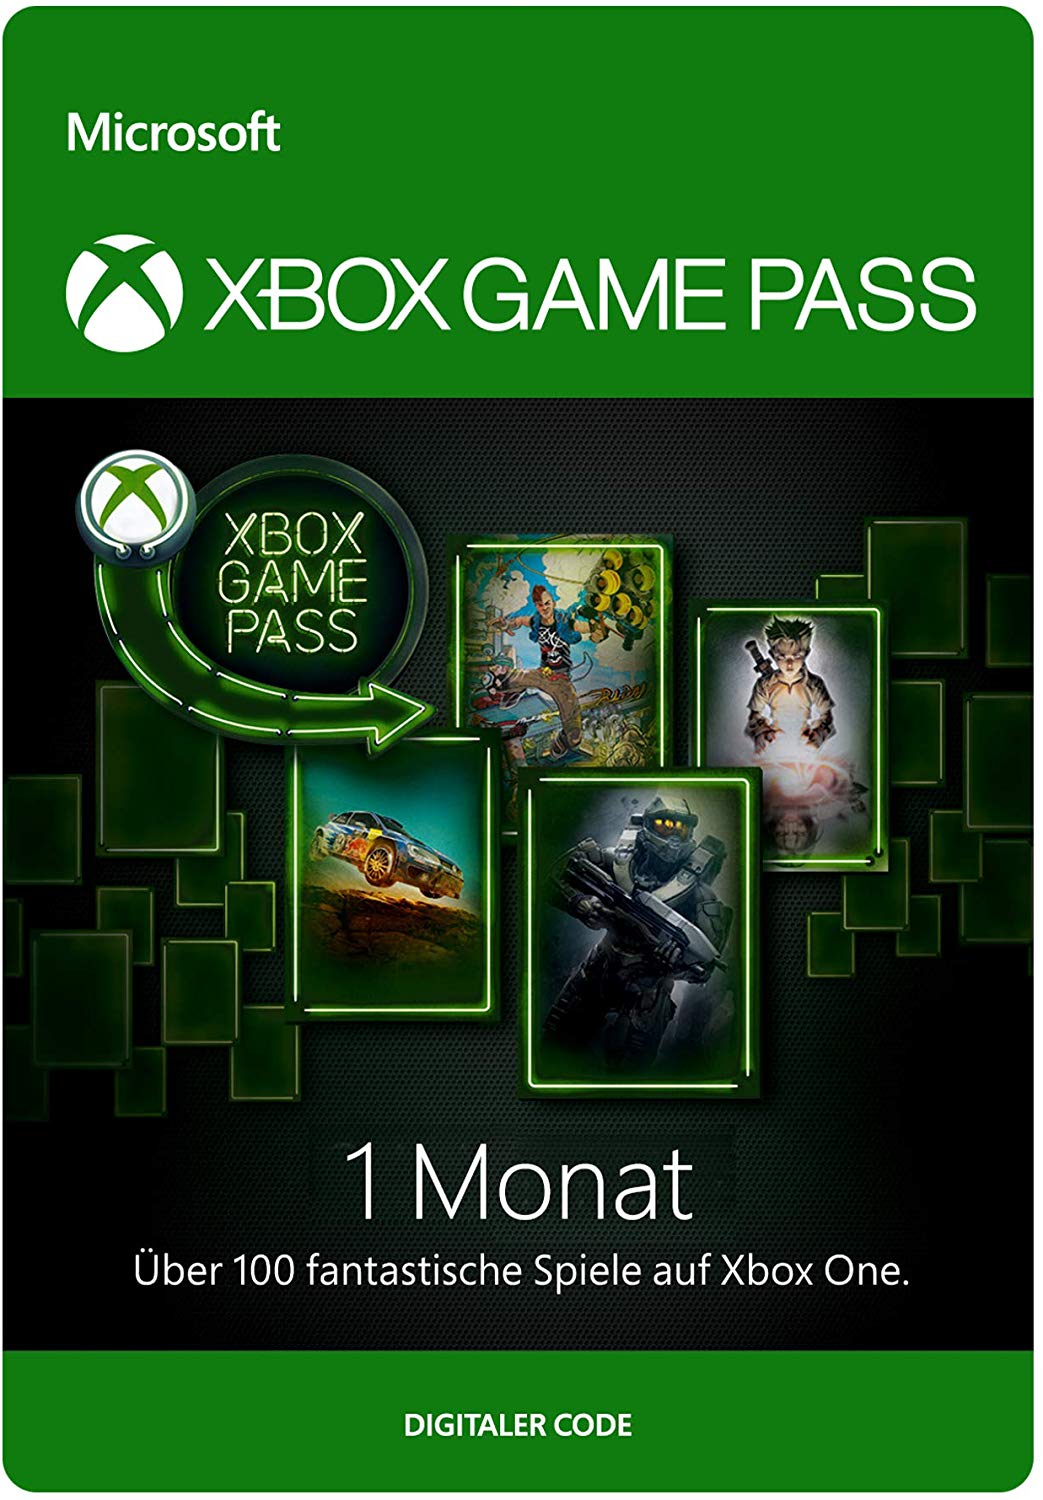 how do i use xbox game pass on pc